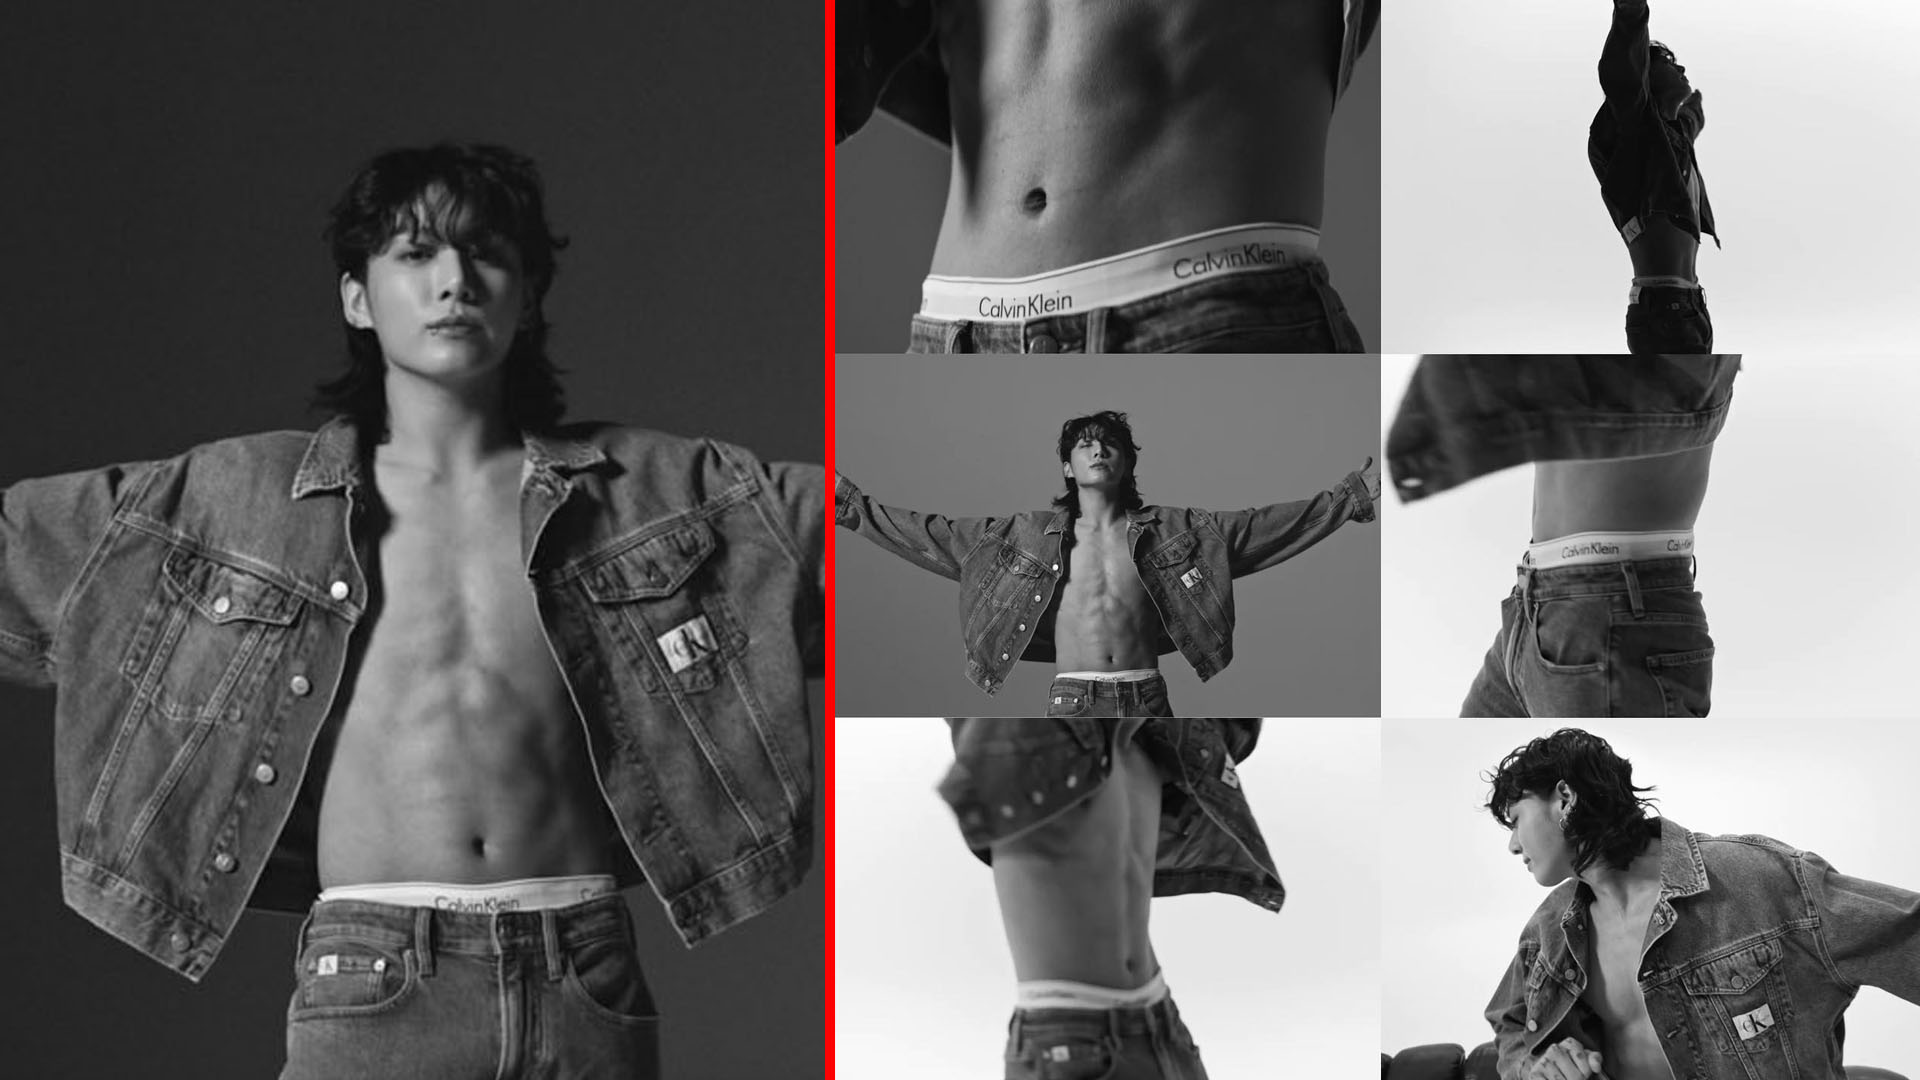 BTS Jungkook Showed Off Abs for Calvin Klein Campaign!